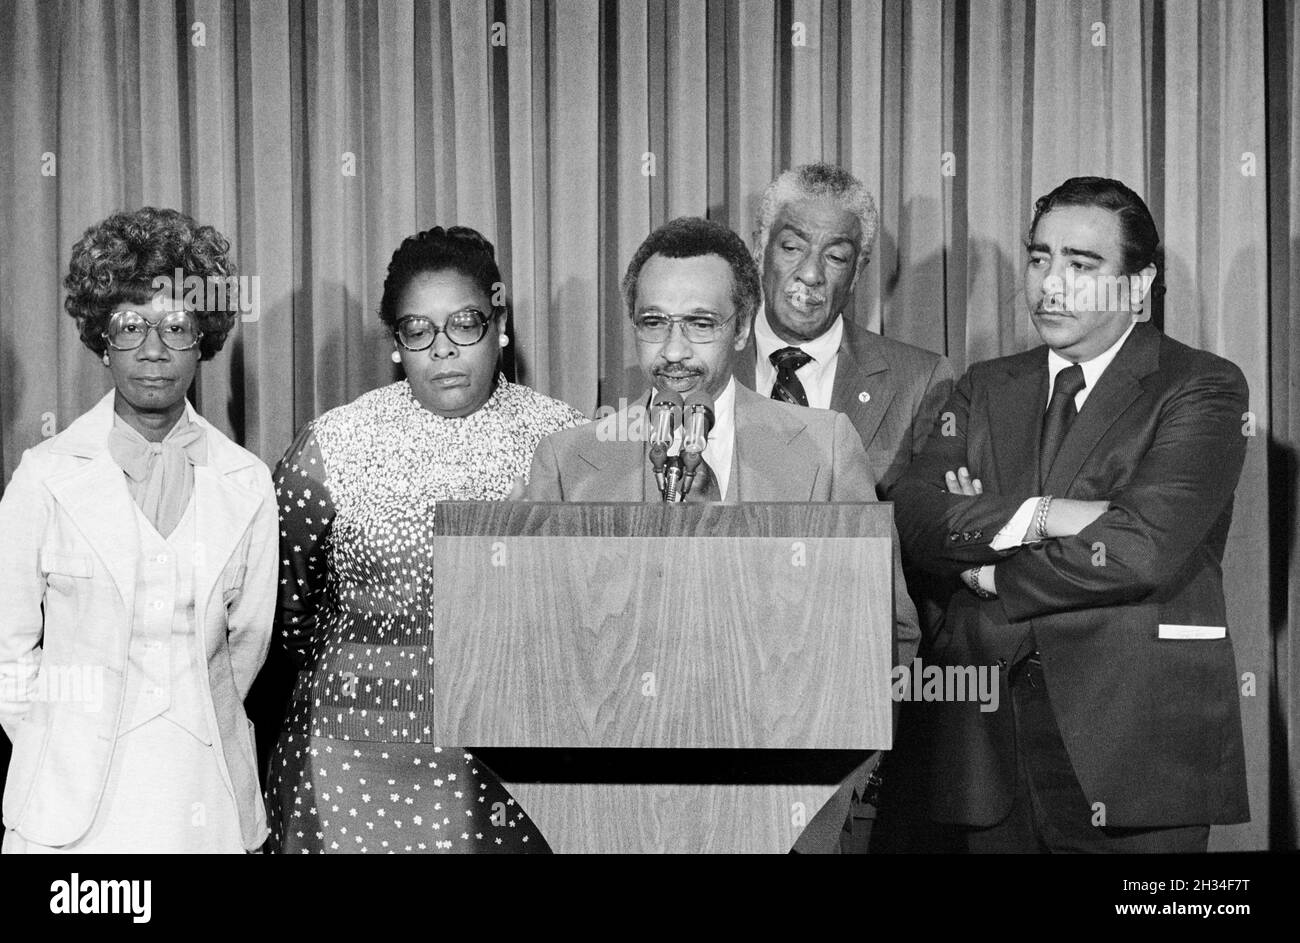 Congressional Black Caucus Members, Shirley Chisholm, Cardiss Collins, Parren Mitchell, Ralph Metcalfe, Charles Rangel, at Press Conference after meeting with U.S. President Jimmy Carter, Washington, D.C., USA, Marion S. Trikosko, US News & World Report Magazine Collection, April 26, 1978 Stock Photo